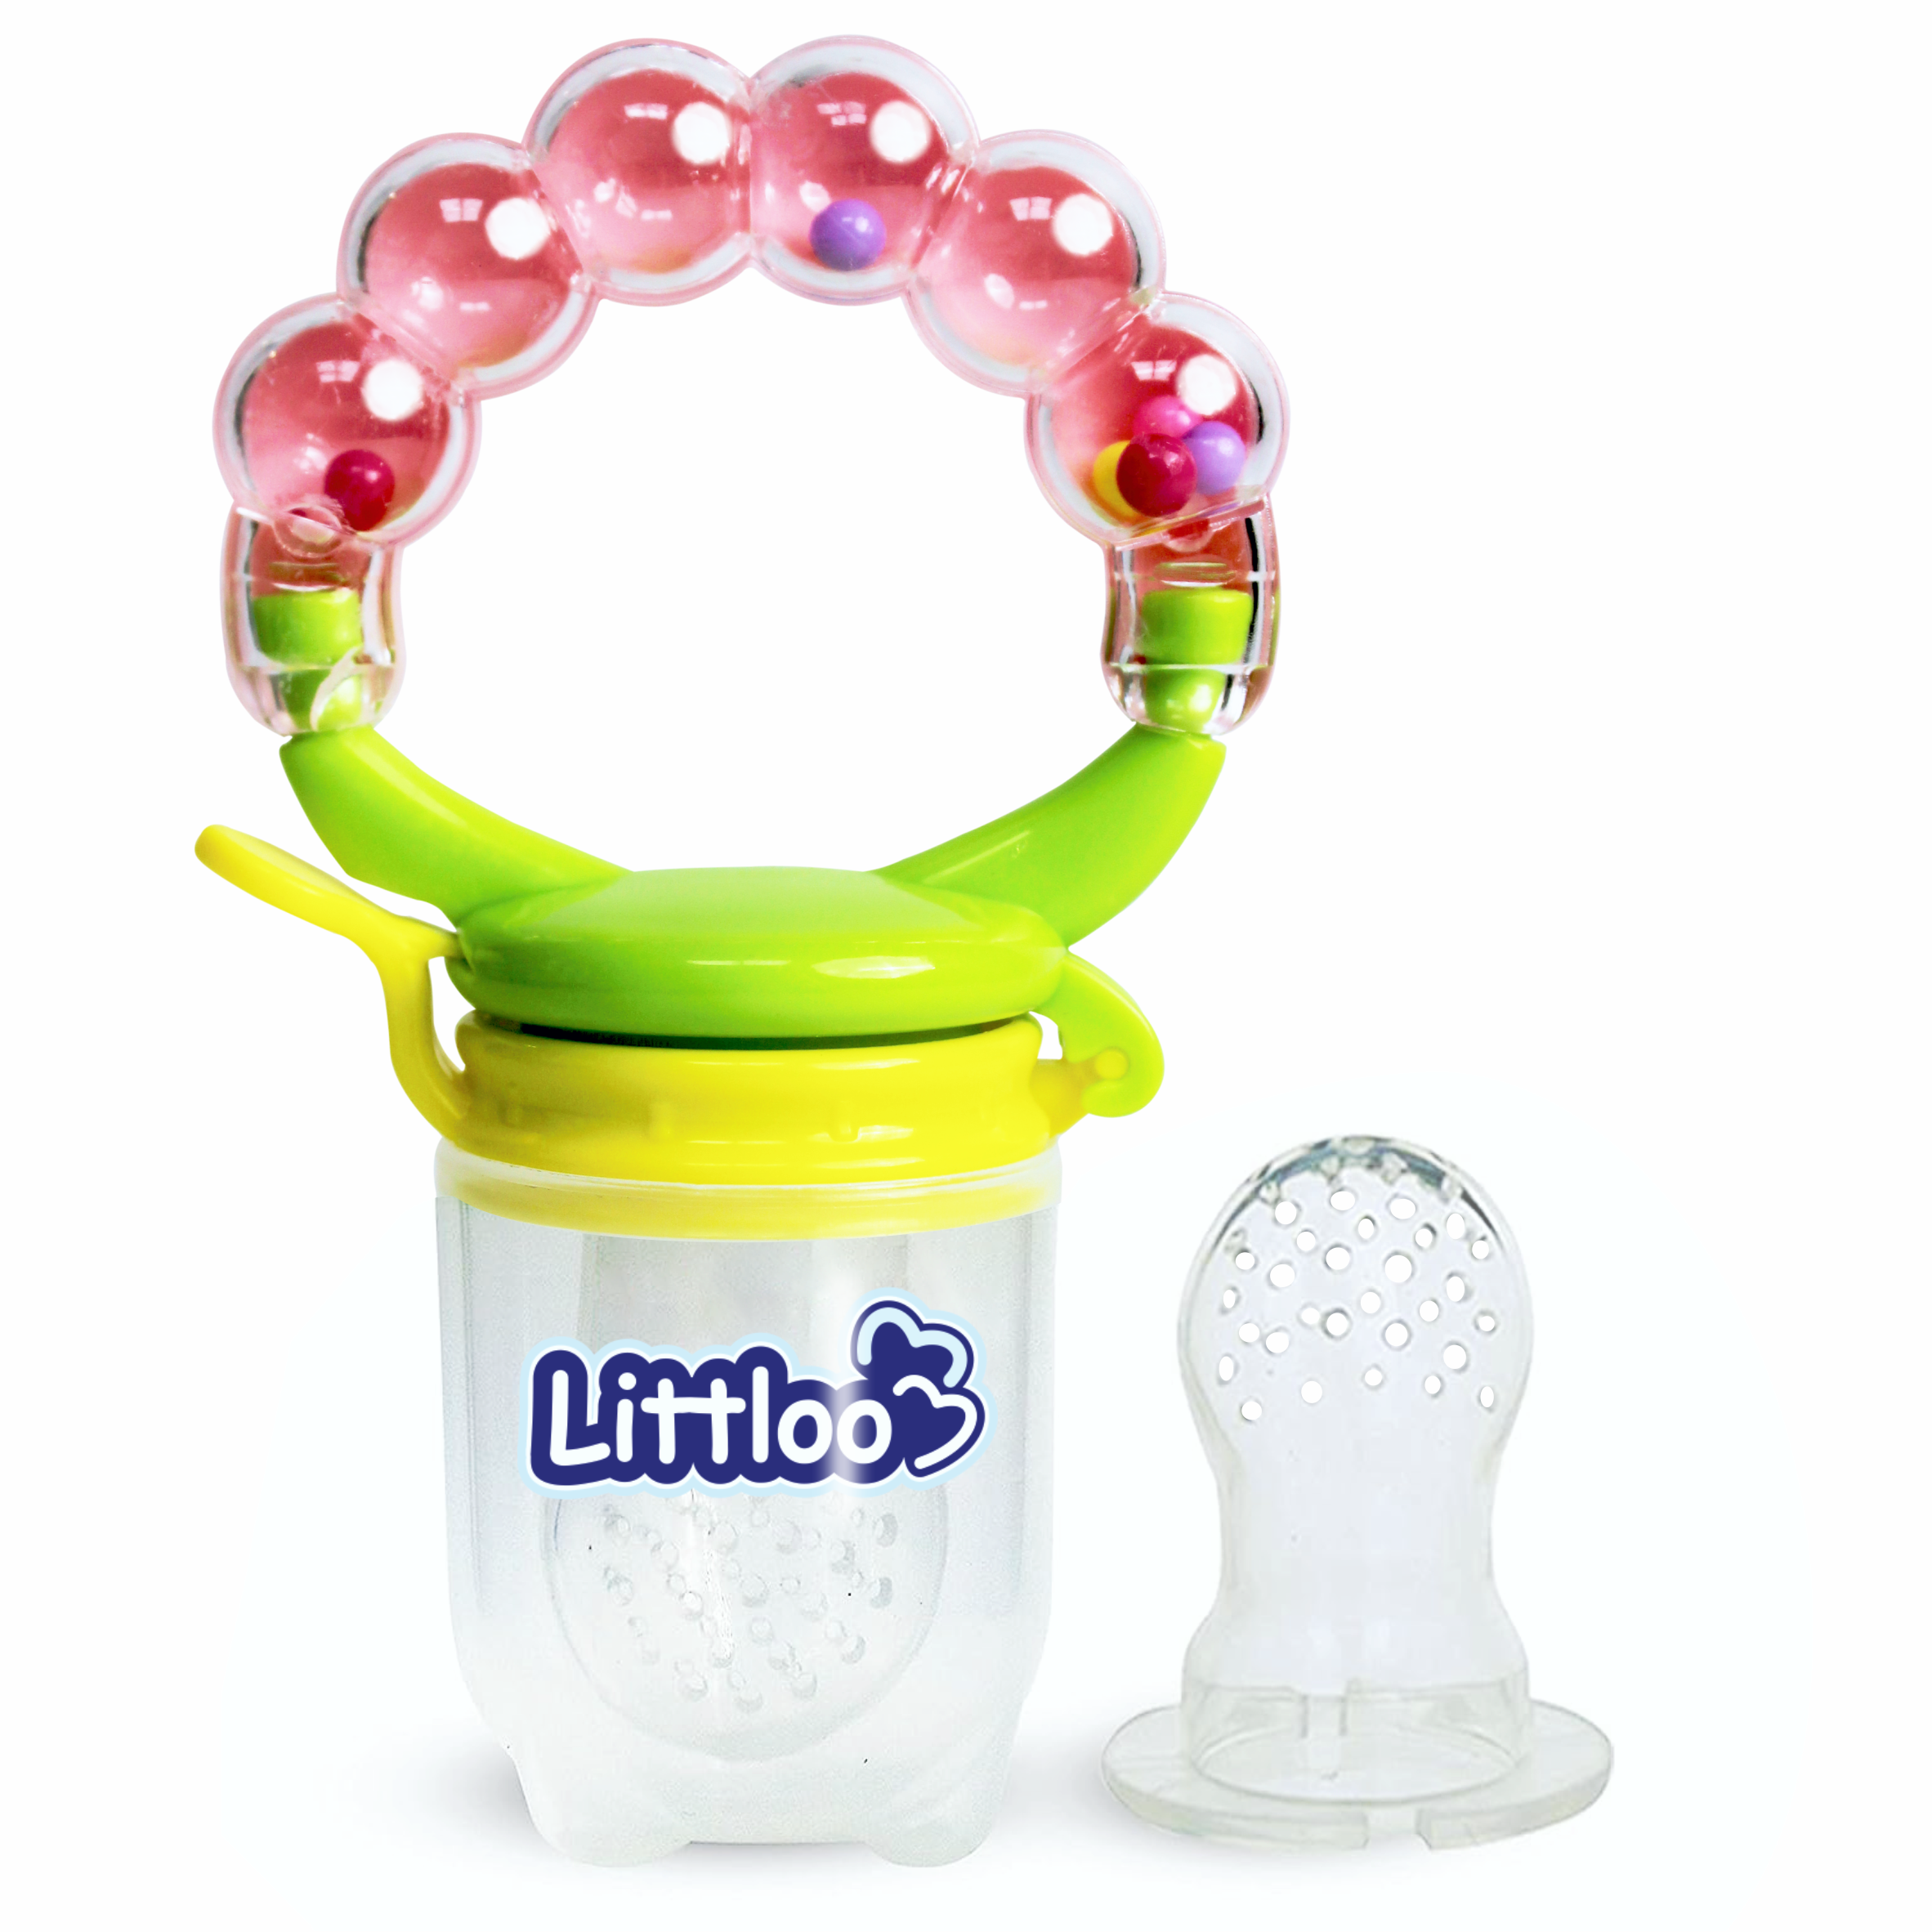 Littloo Silicone Fruit/Food Nibbler for Infant and Baby - Littloo